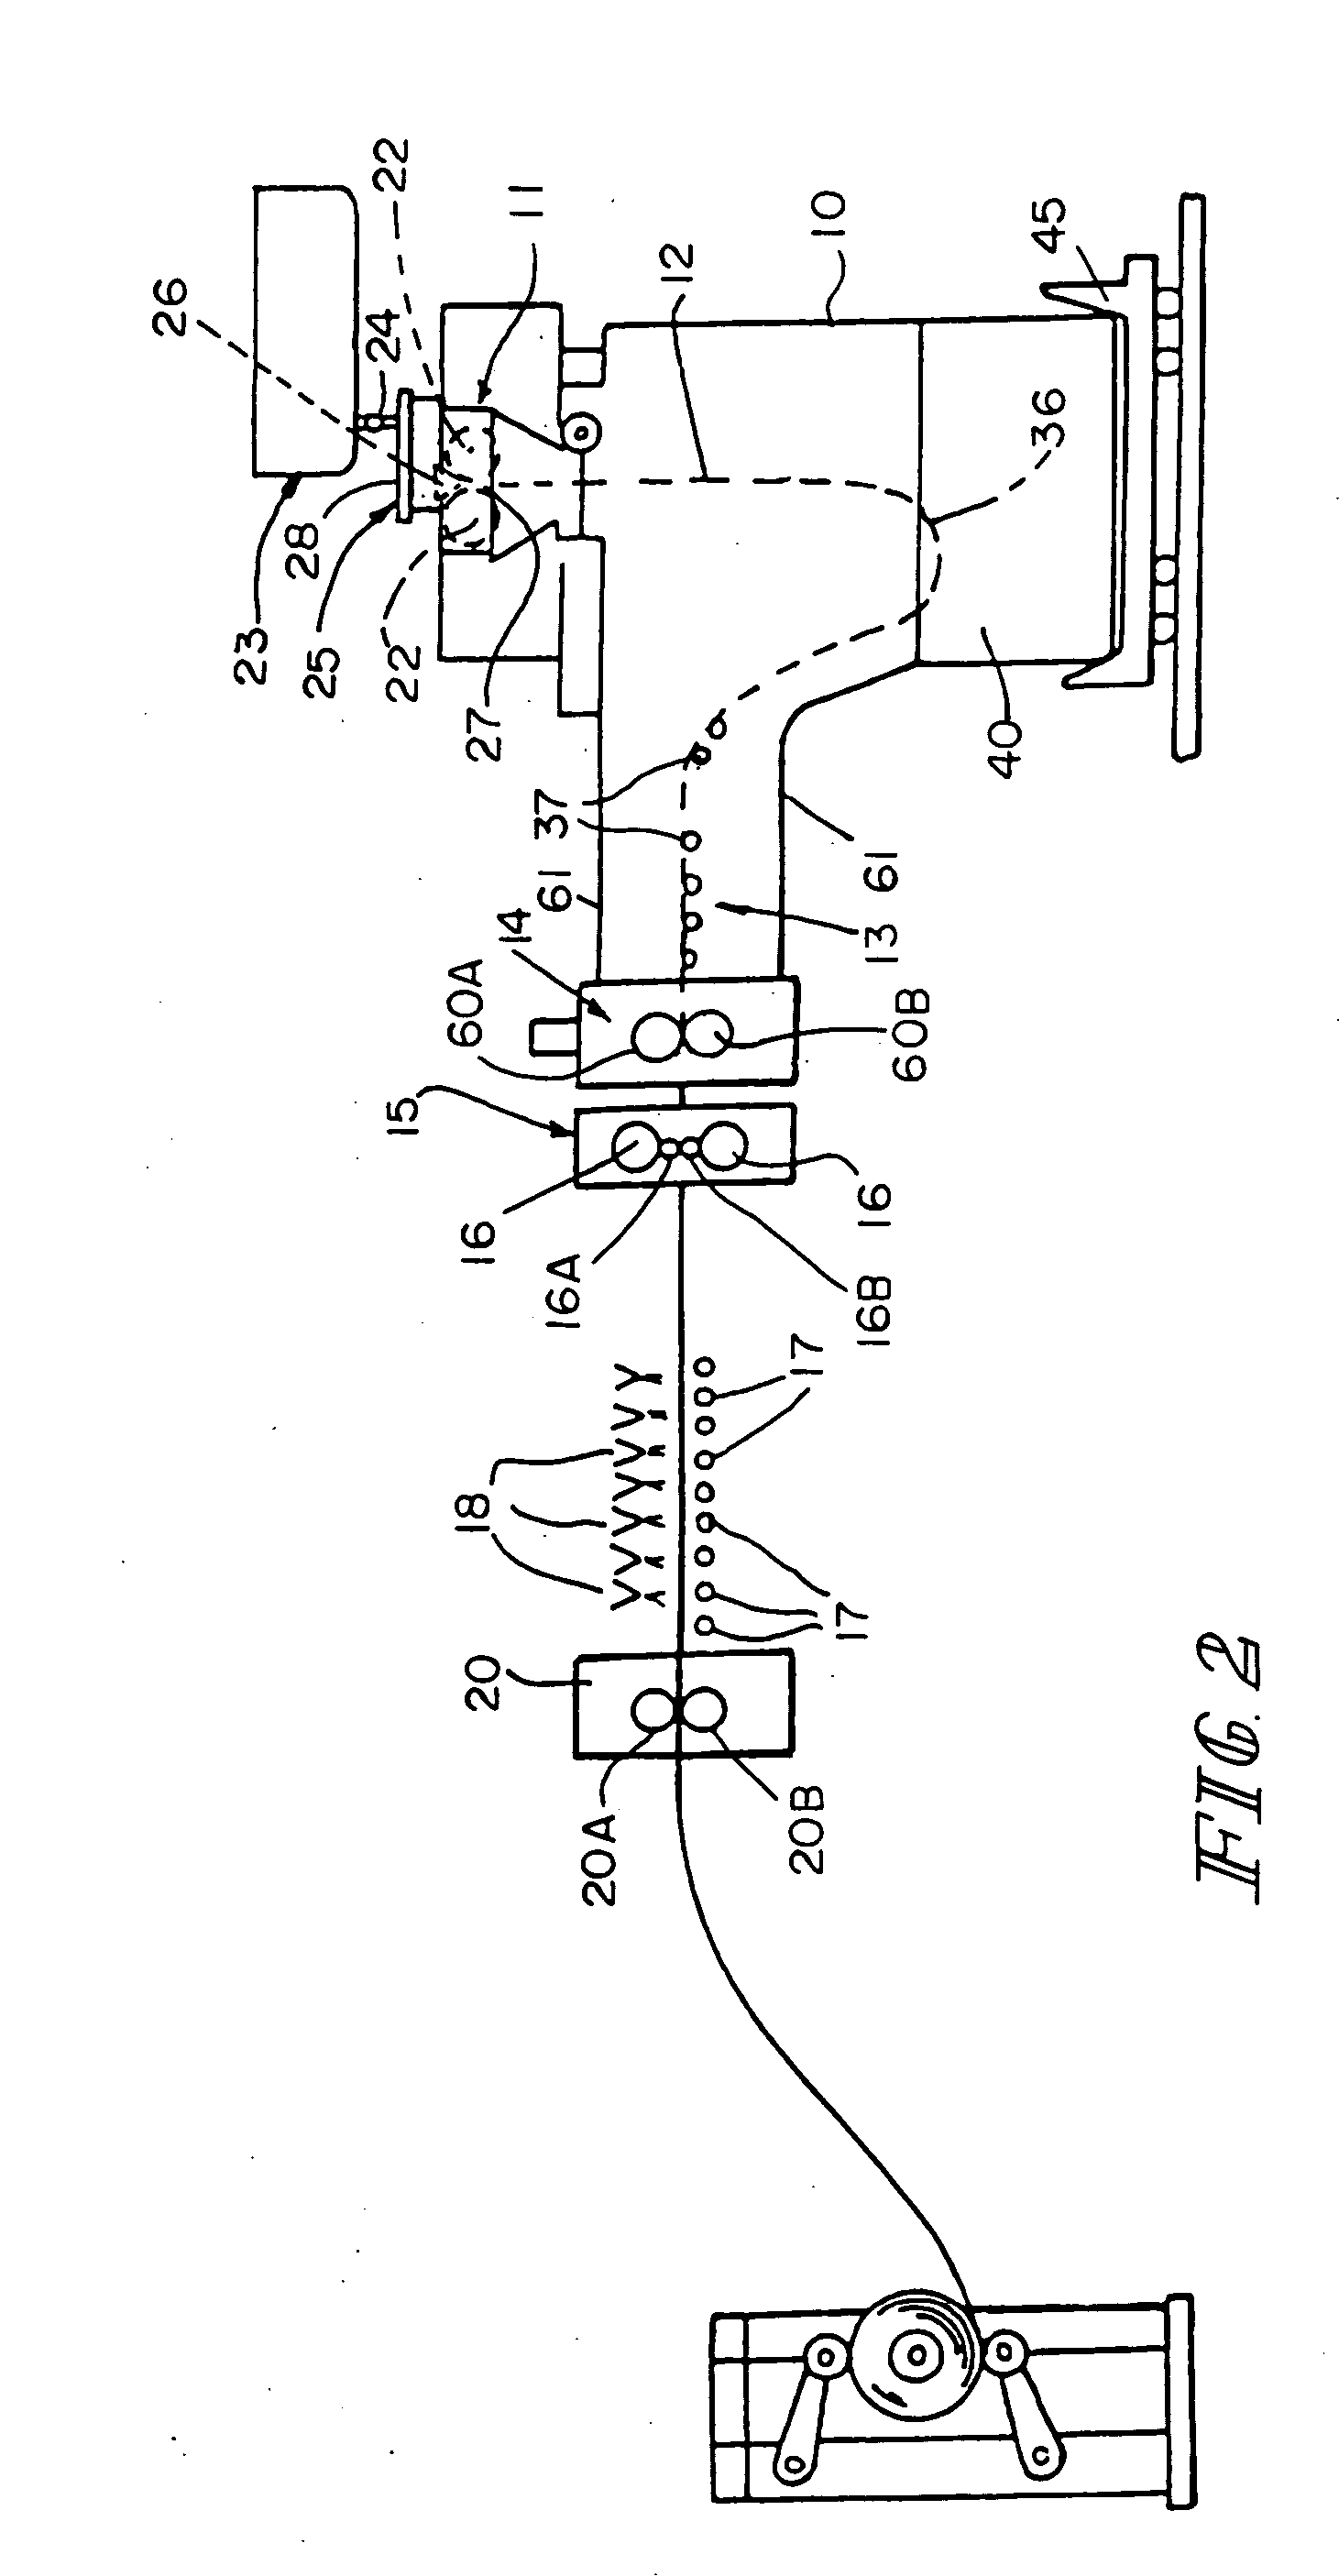 Pinch roll apparatus and method for operating the same